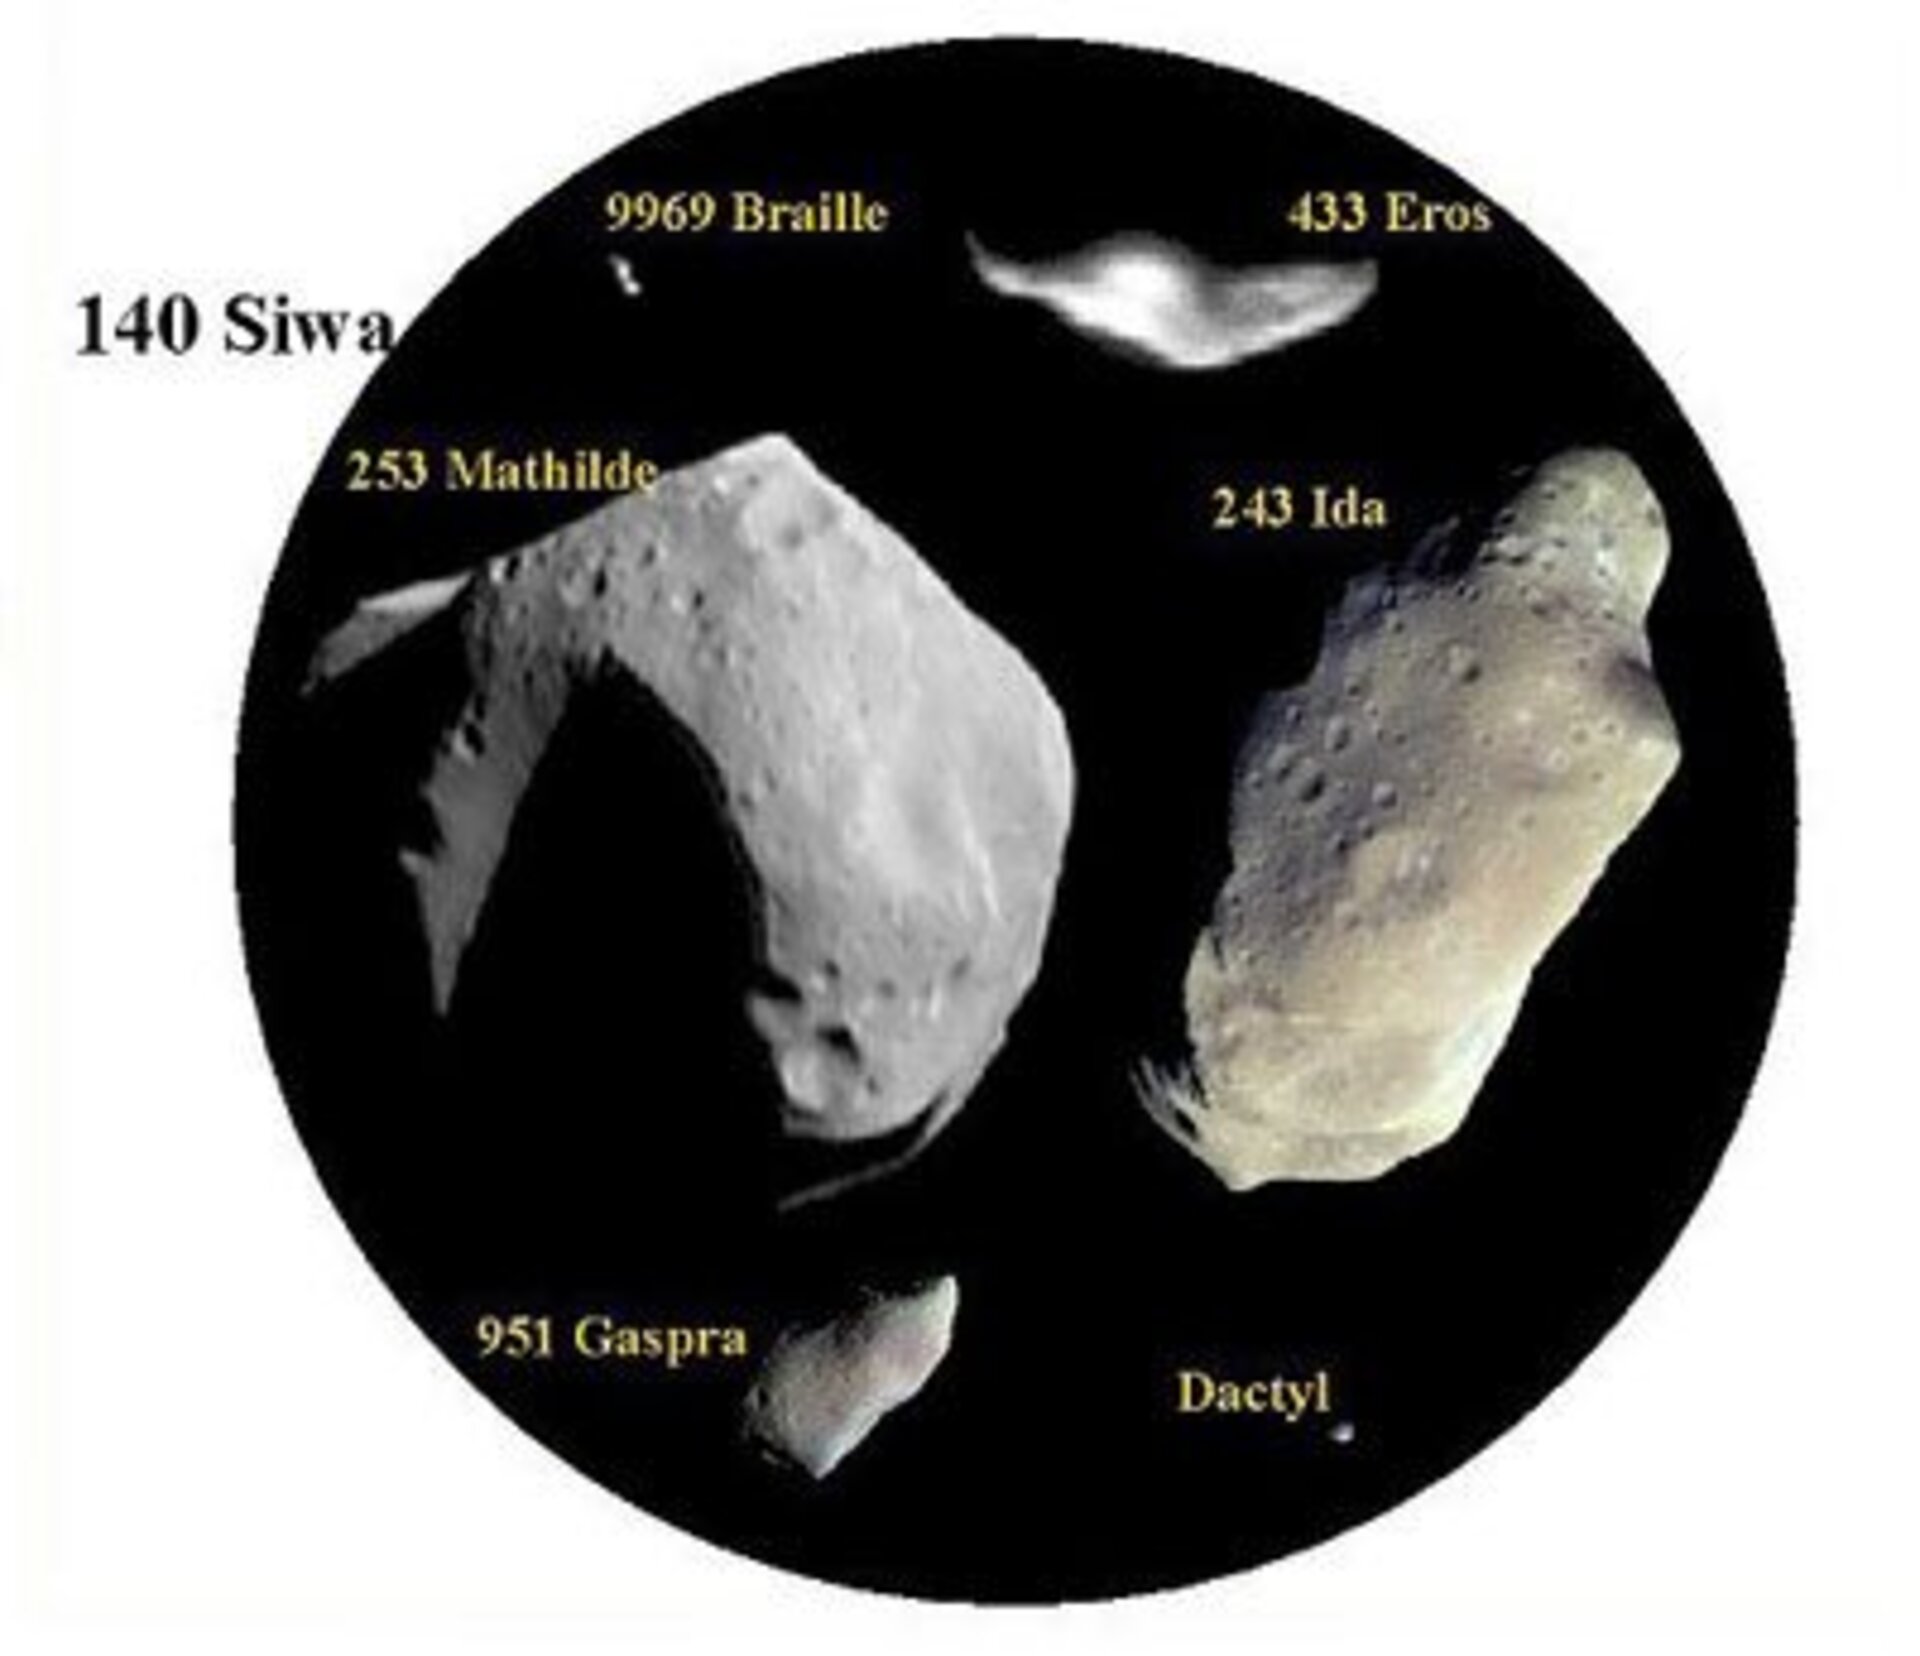 Asteroids come in many shapes and sizes